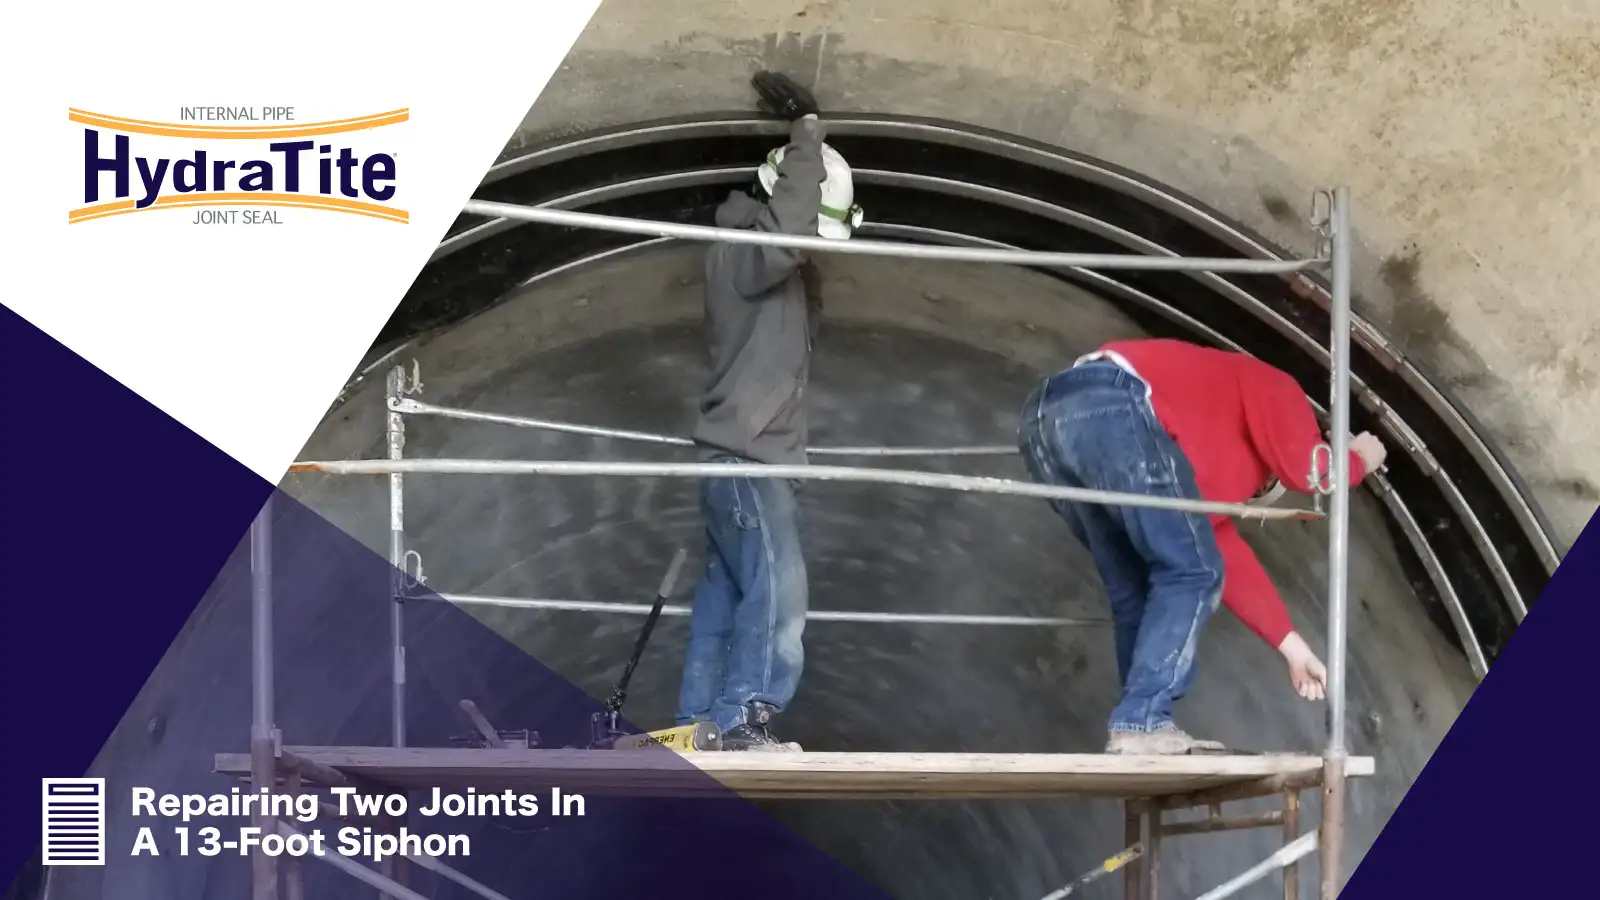 Two technicians on scaffolding installing a large HydraTite seal, 'Repairing Four Joints In 13-Foot Siphons'